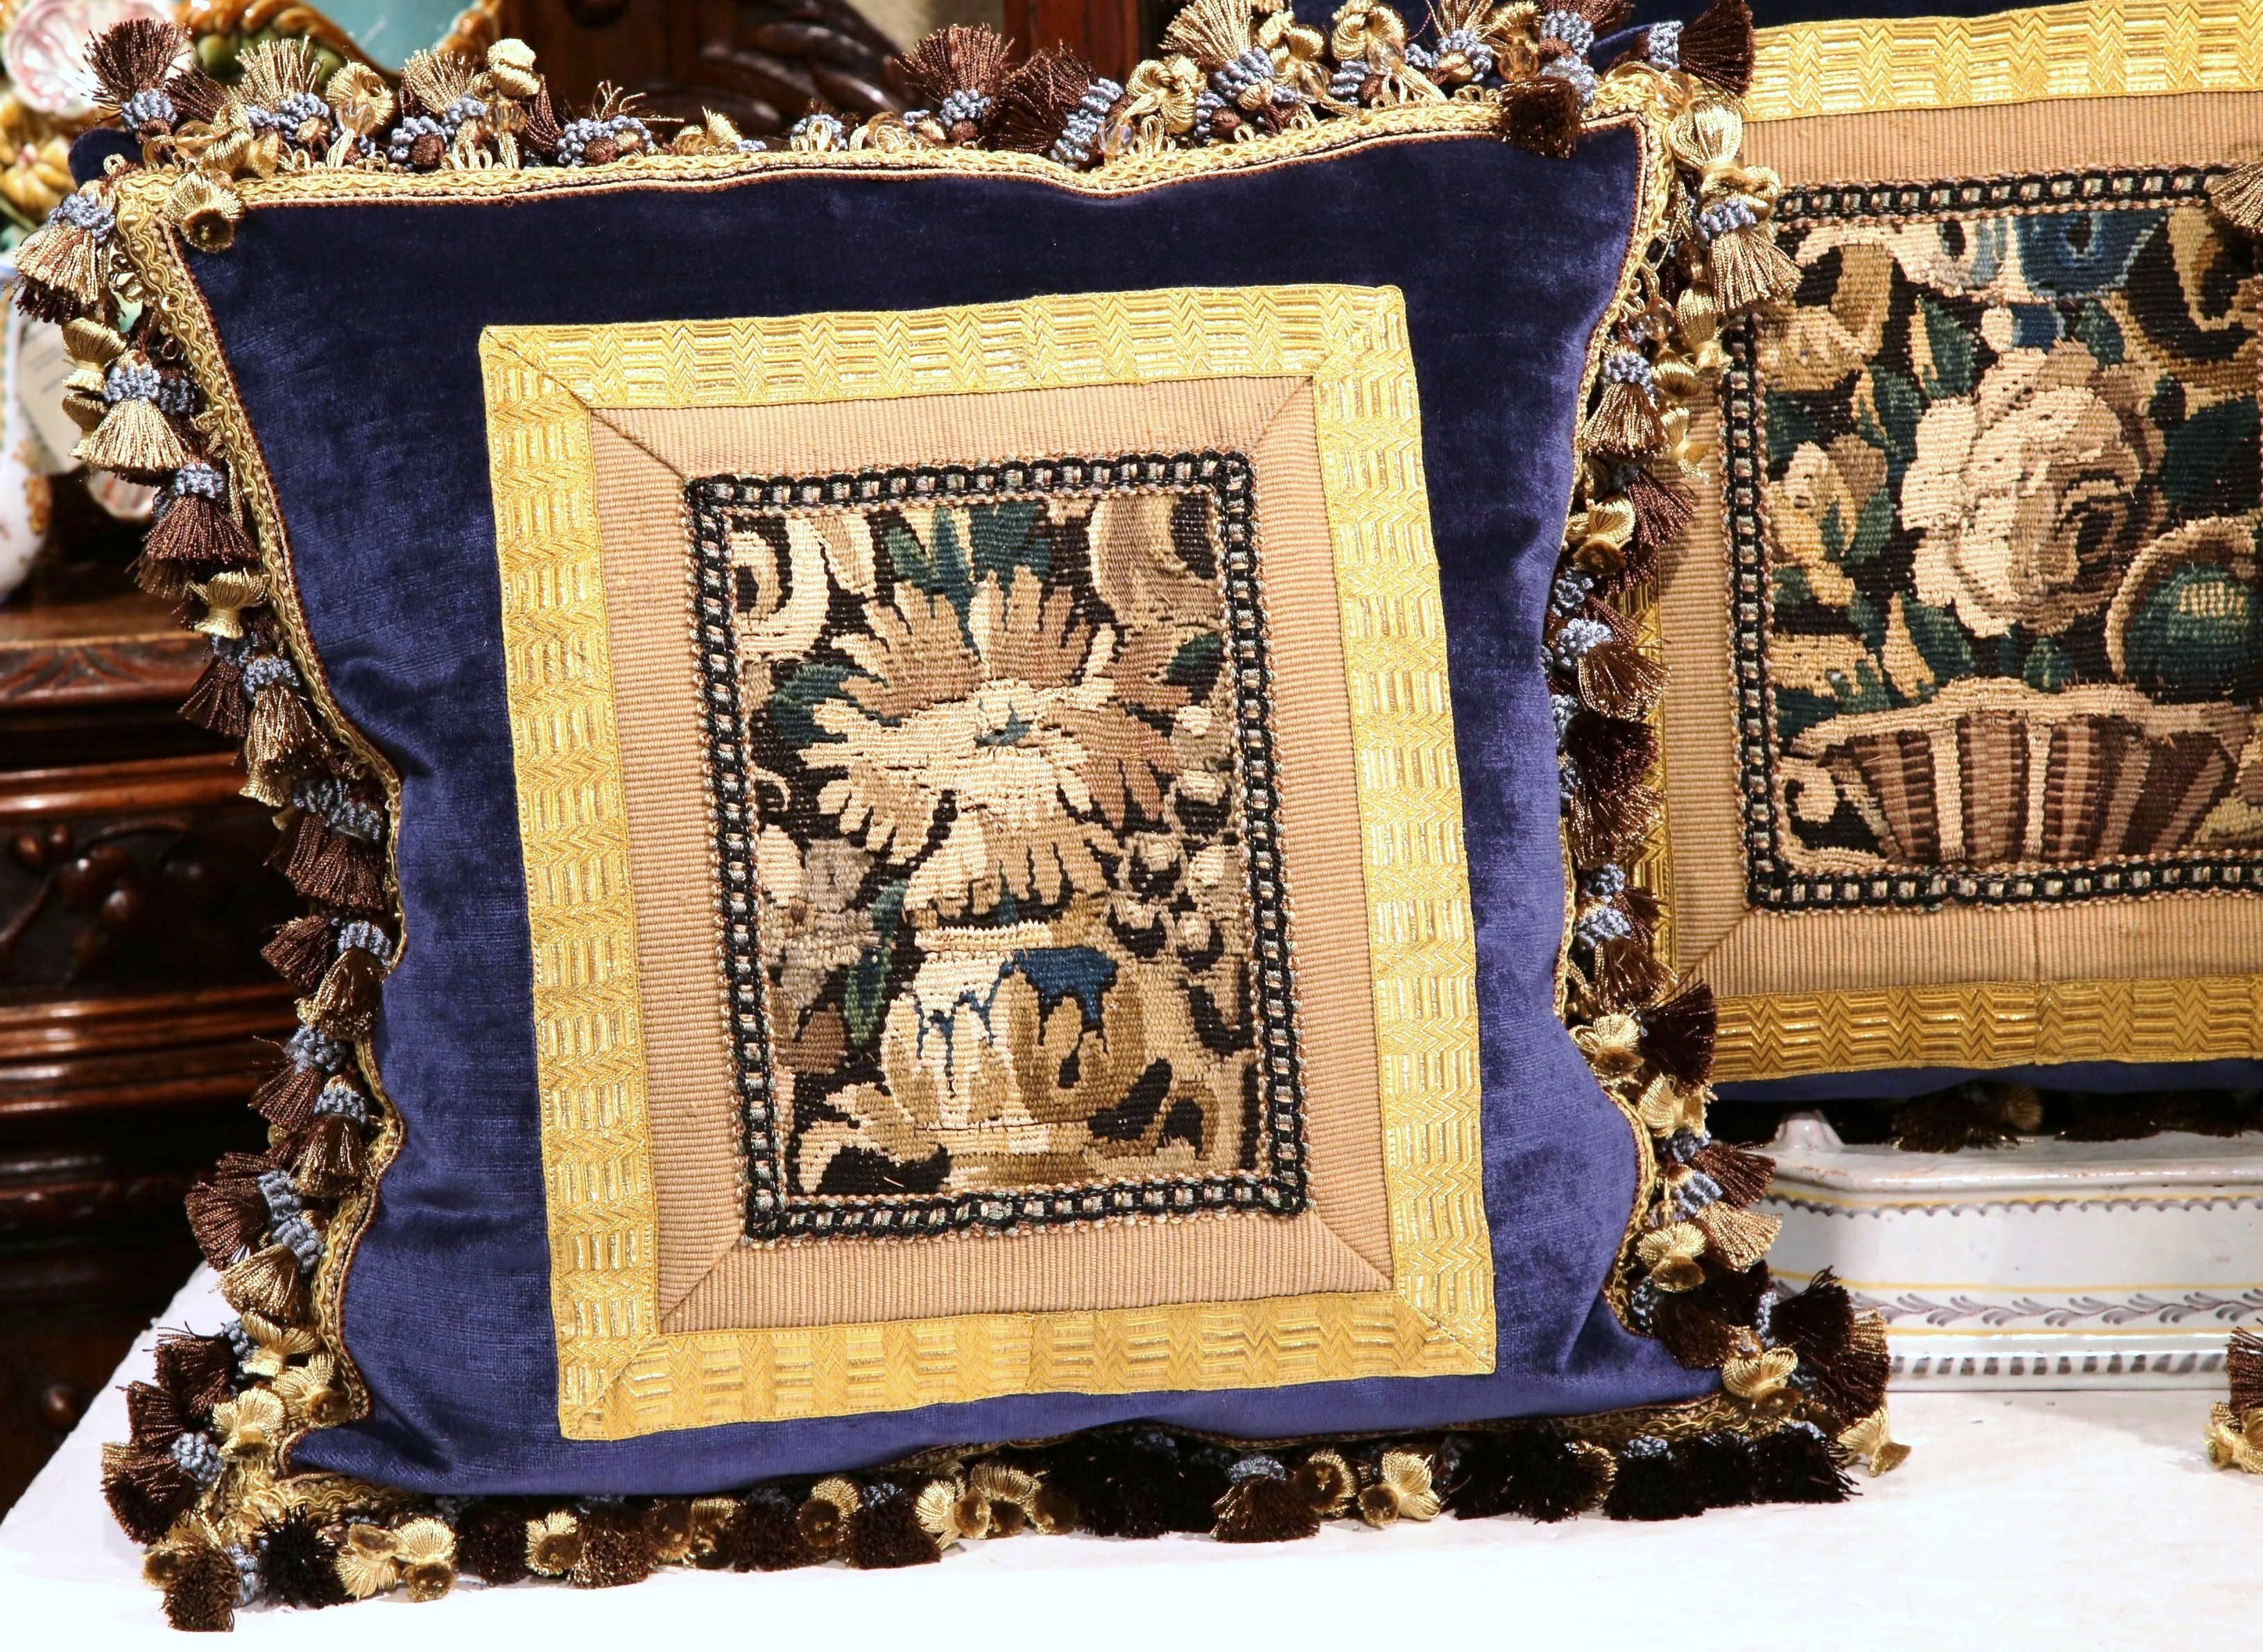 Decorate a sofa or a bed with this beautiful set of three pillows made with 18th century tapestry fragments from Aubusson, France. Each cushion features antique gold trim, blue velvet, elaborate fringe and tassels, and is filled with comfortable